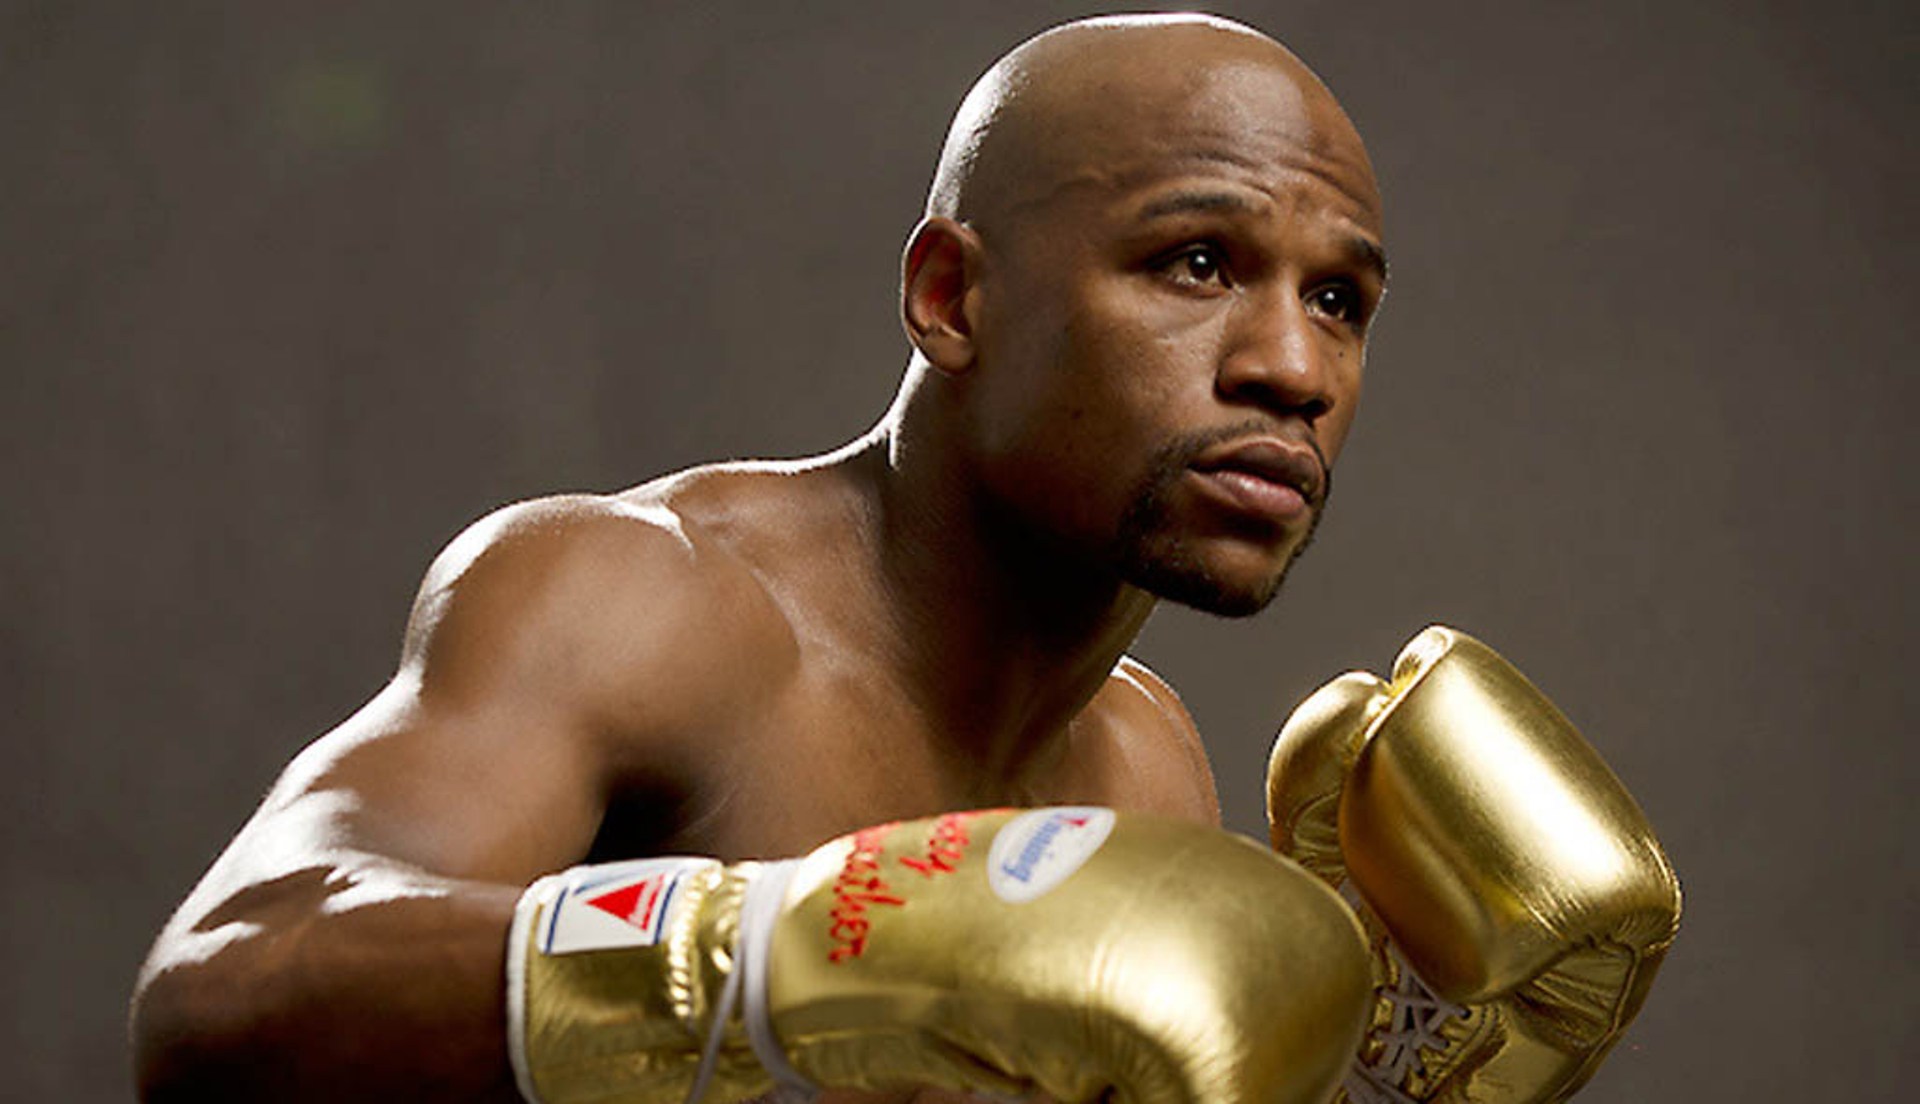 ▷ Floyd Mayweather Jr Money (53-0-1) - Fights, Stats, Videos - FITE